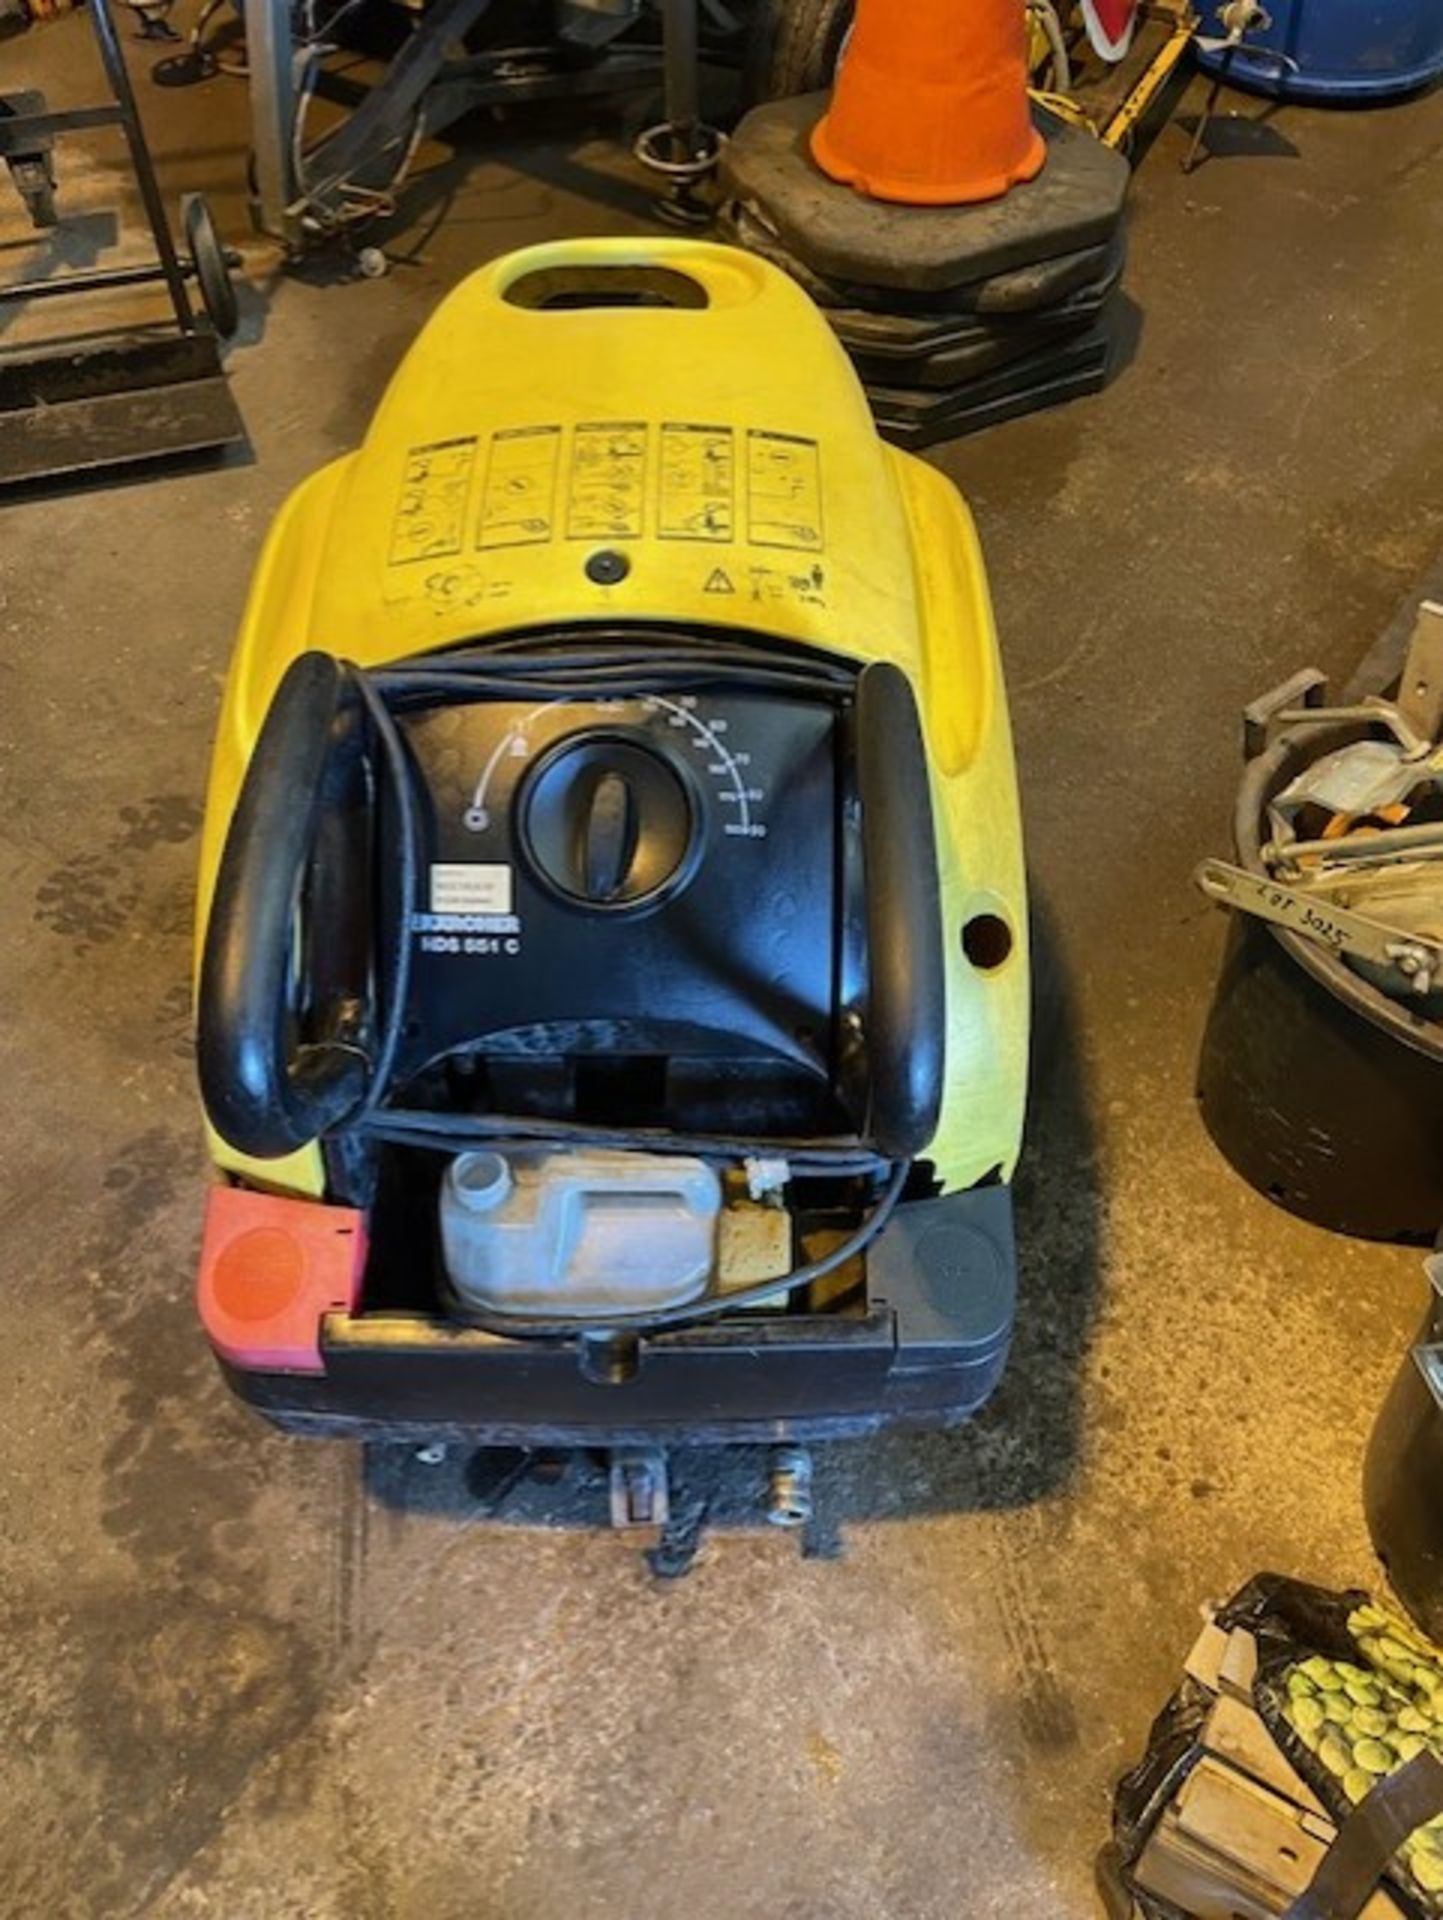 Karcher hot and cold pressure washer hds551 c model it’s in good condition still comes with hose and